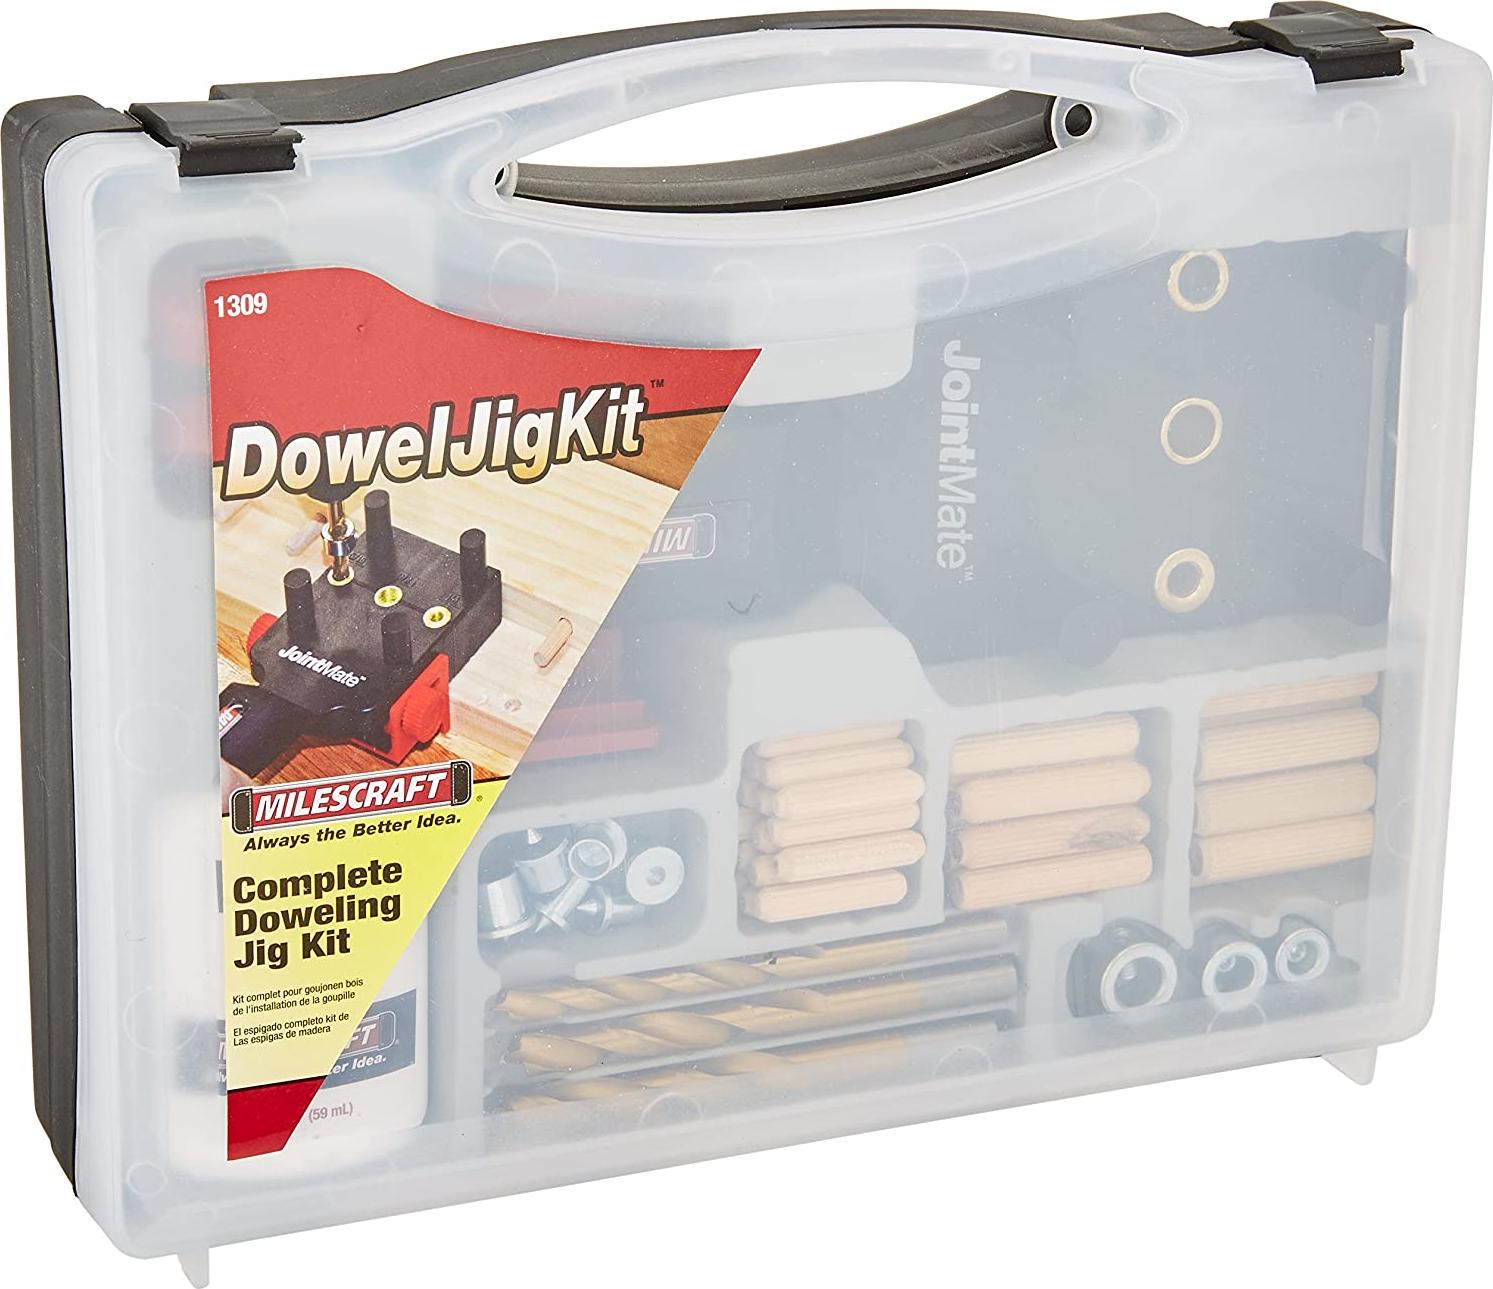 Milescraft, Milescraft 1309 DowelJigKit - Complete Doweling Kit with Dowel Pins and Bits